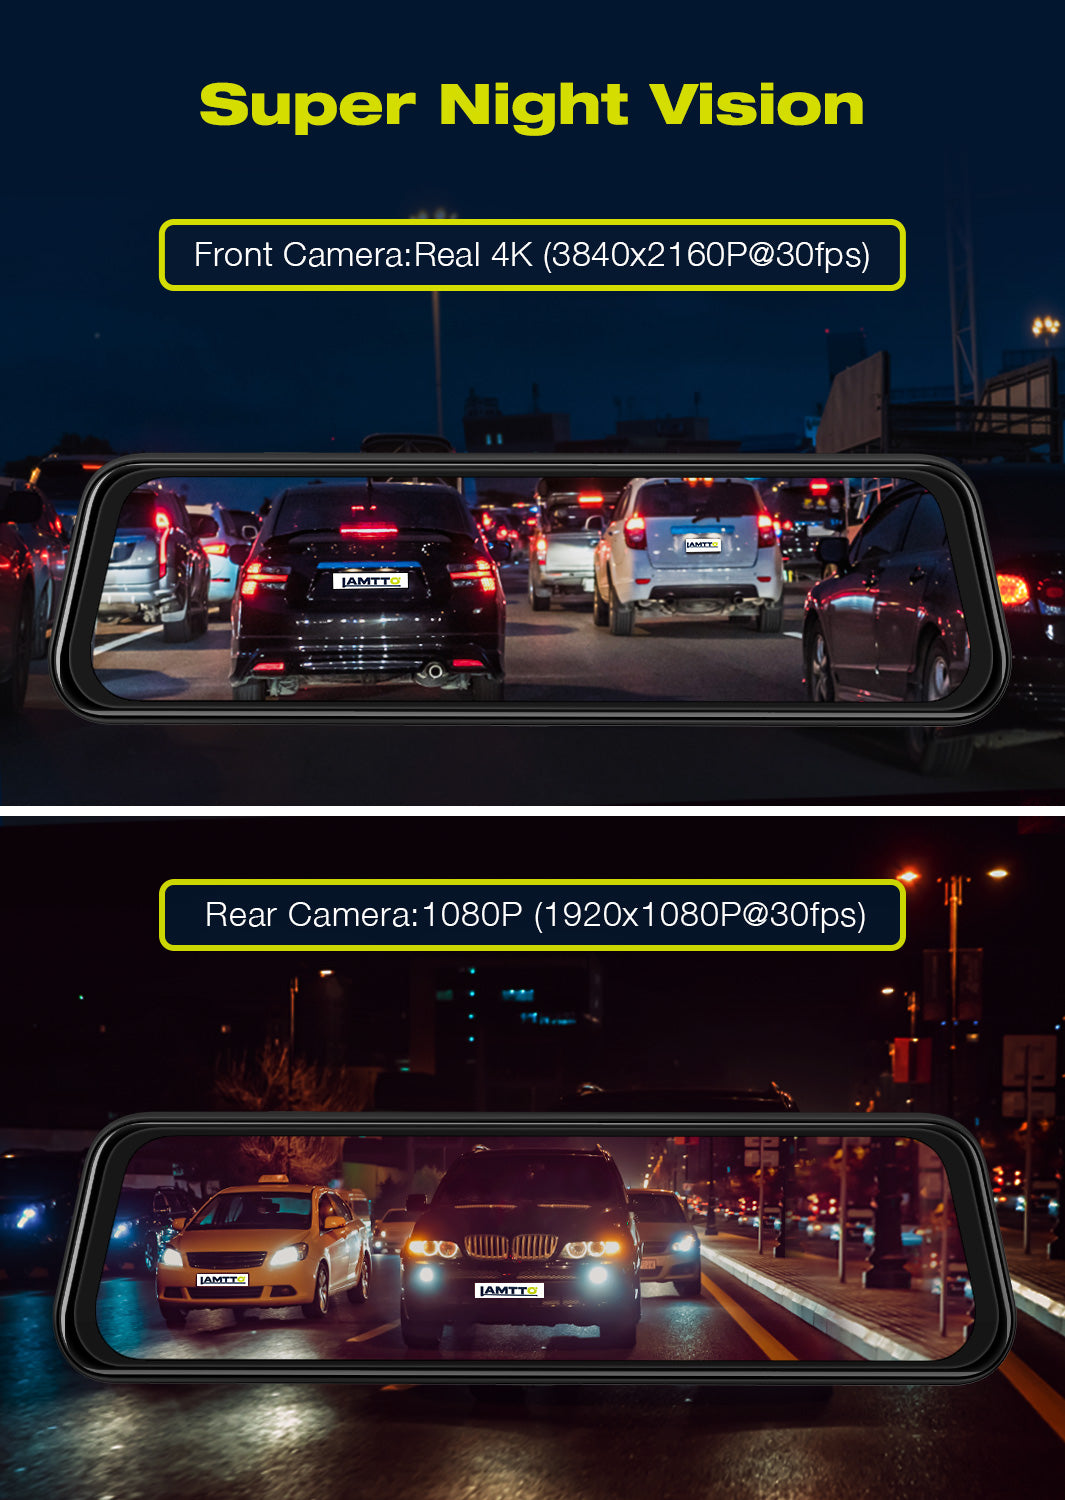 10'''' UHD 4K Touchscreen Mirror Dash Cam Backup Camera Front and 1080P Rear  View with GPS WiFi